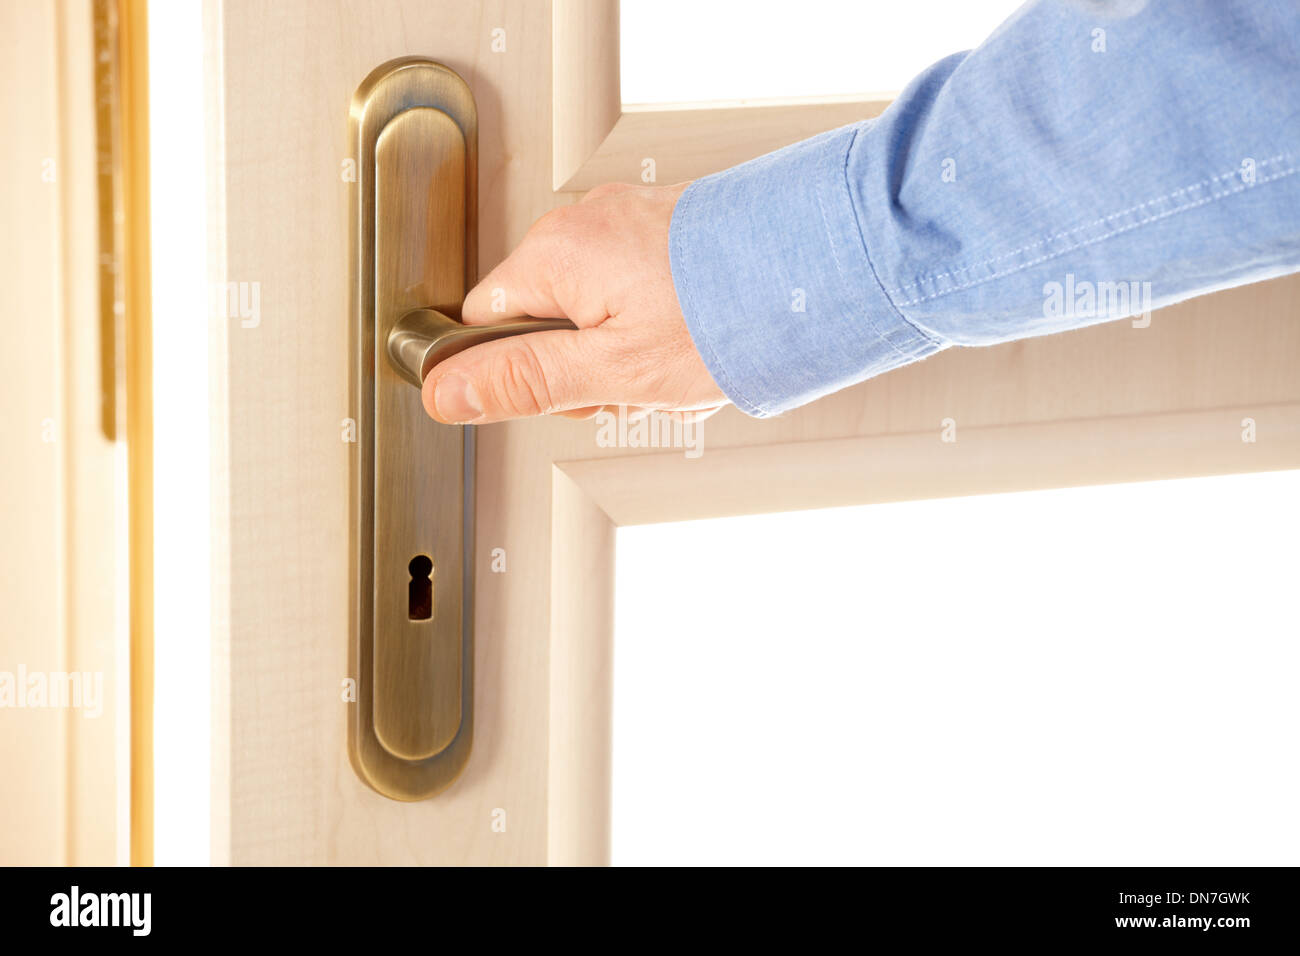 Male hand on handle, opening or closing door Stock Photo